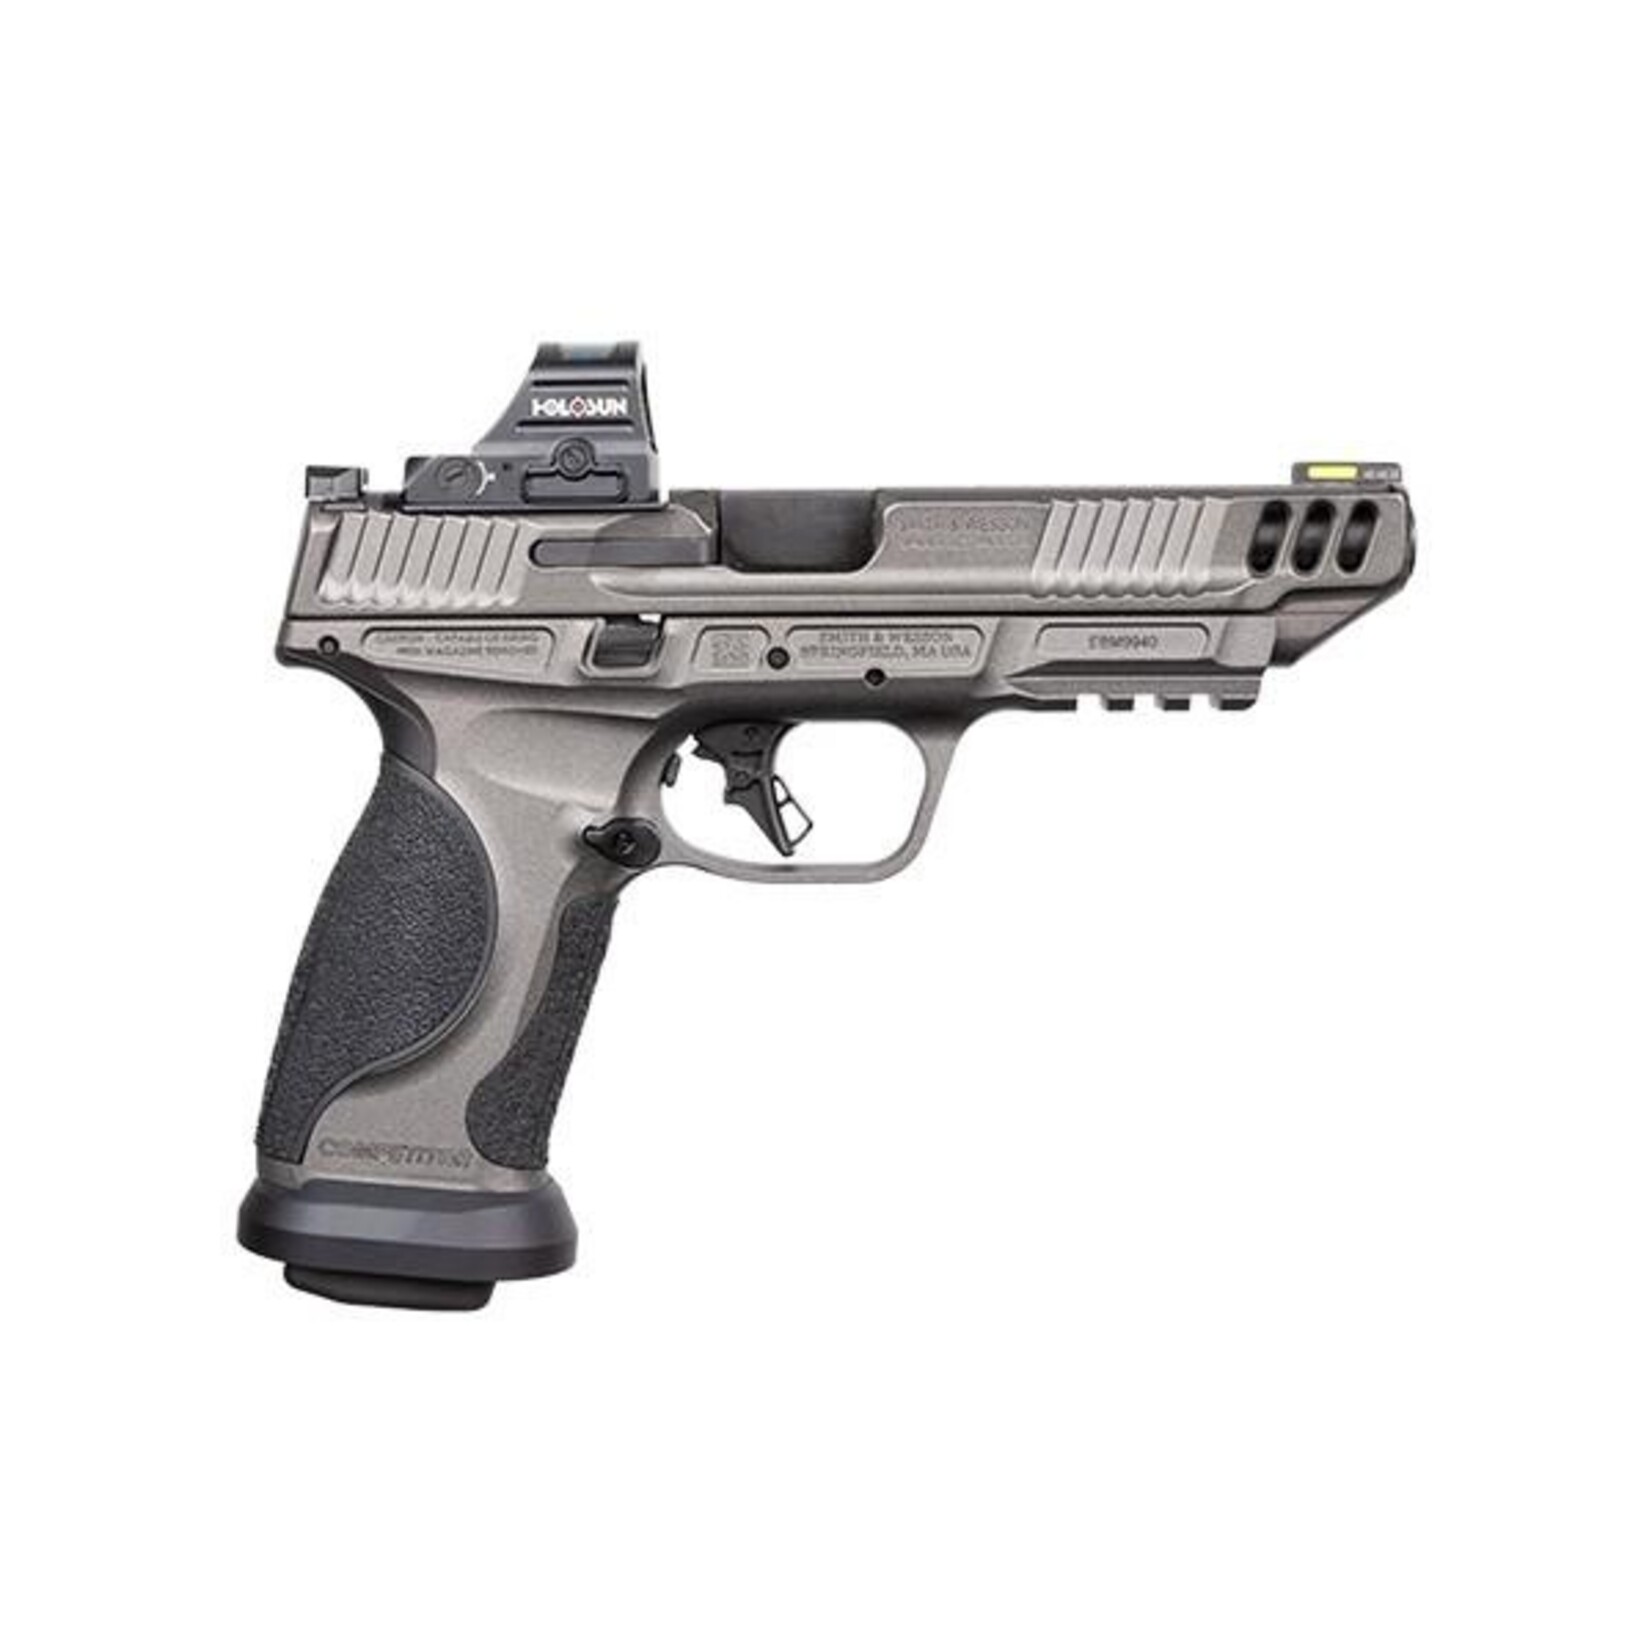 SMITH & WESSON S&W M&P 2.0 COMPETITOR , 9MM,  5.0''BBL, TUNG METAL, 17+1